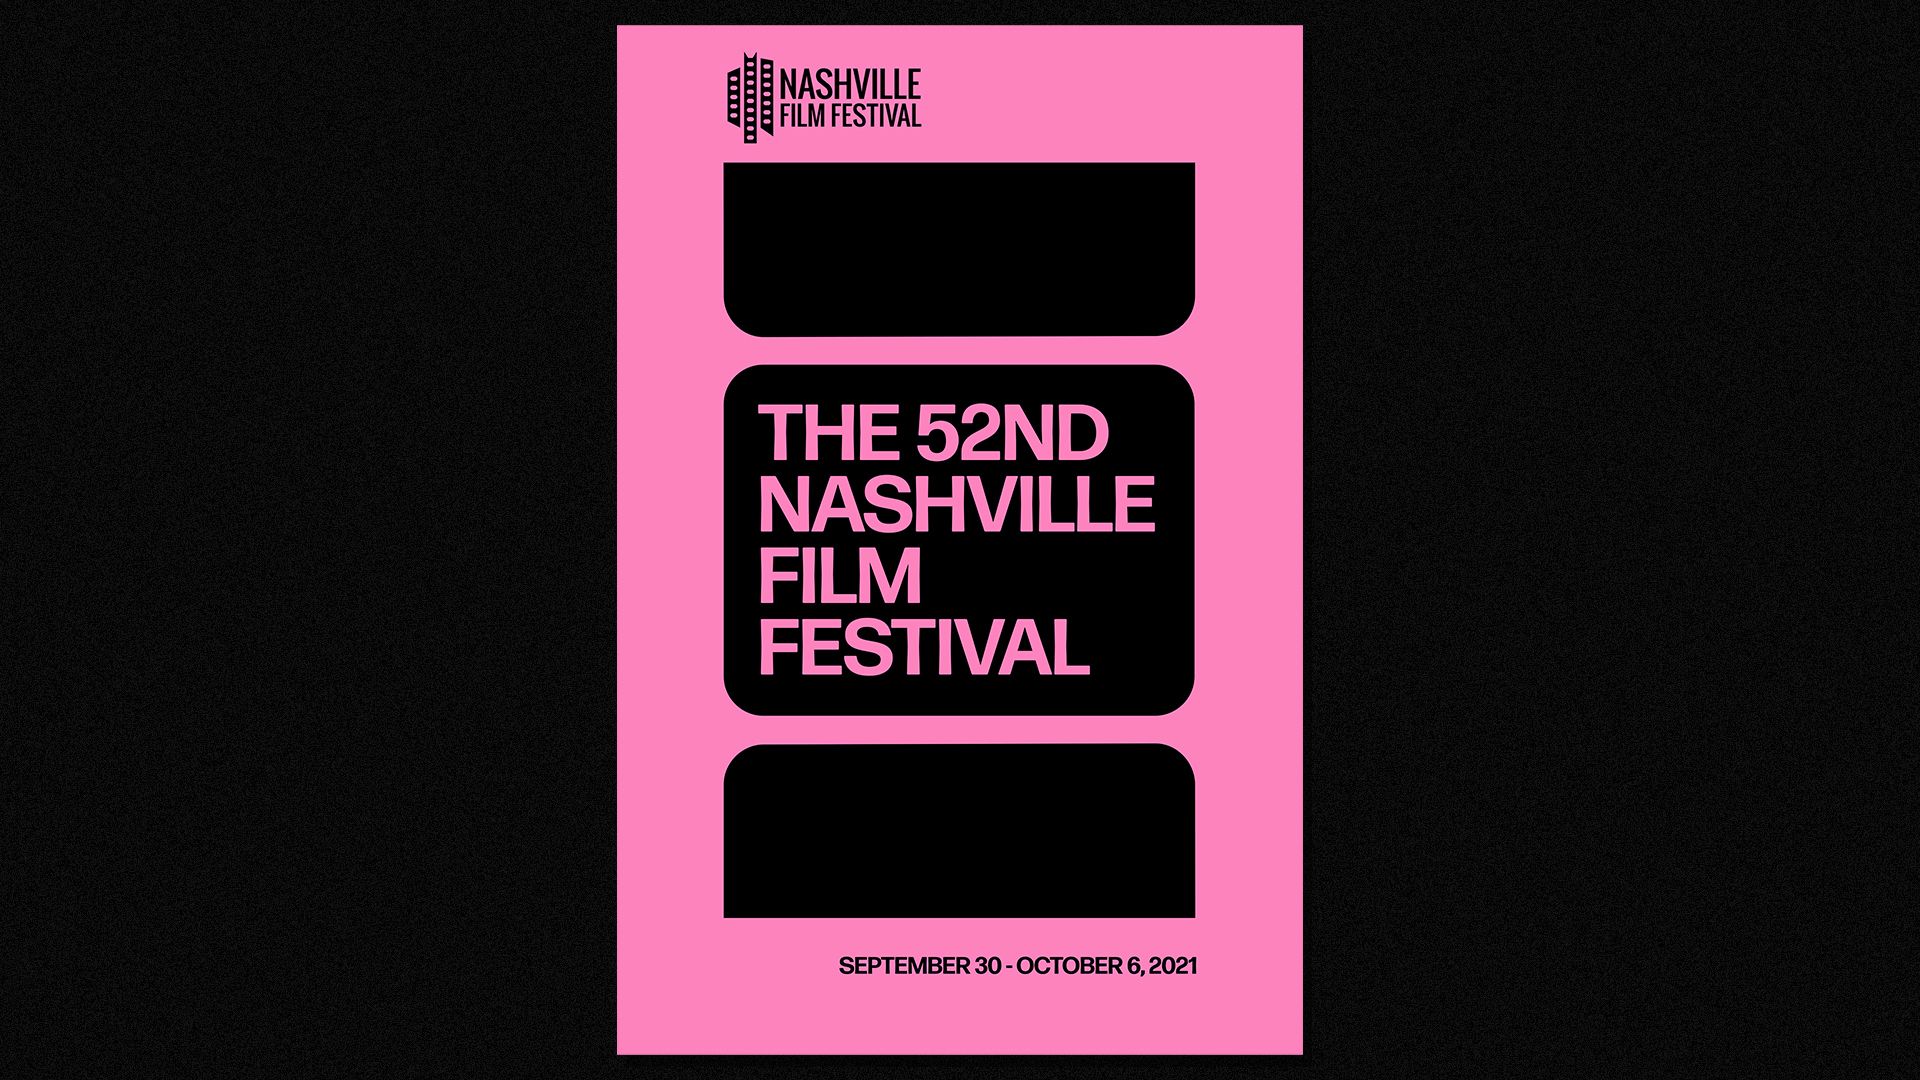 A poster for Nashville's 52nd annual film festival.